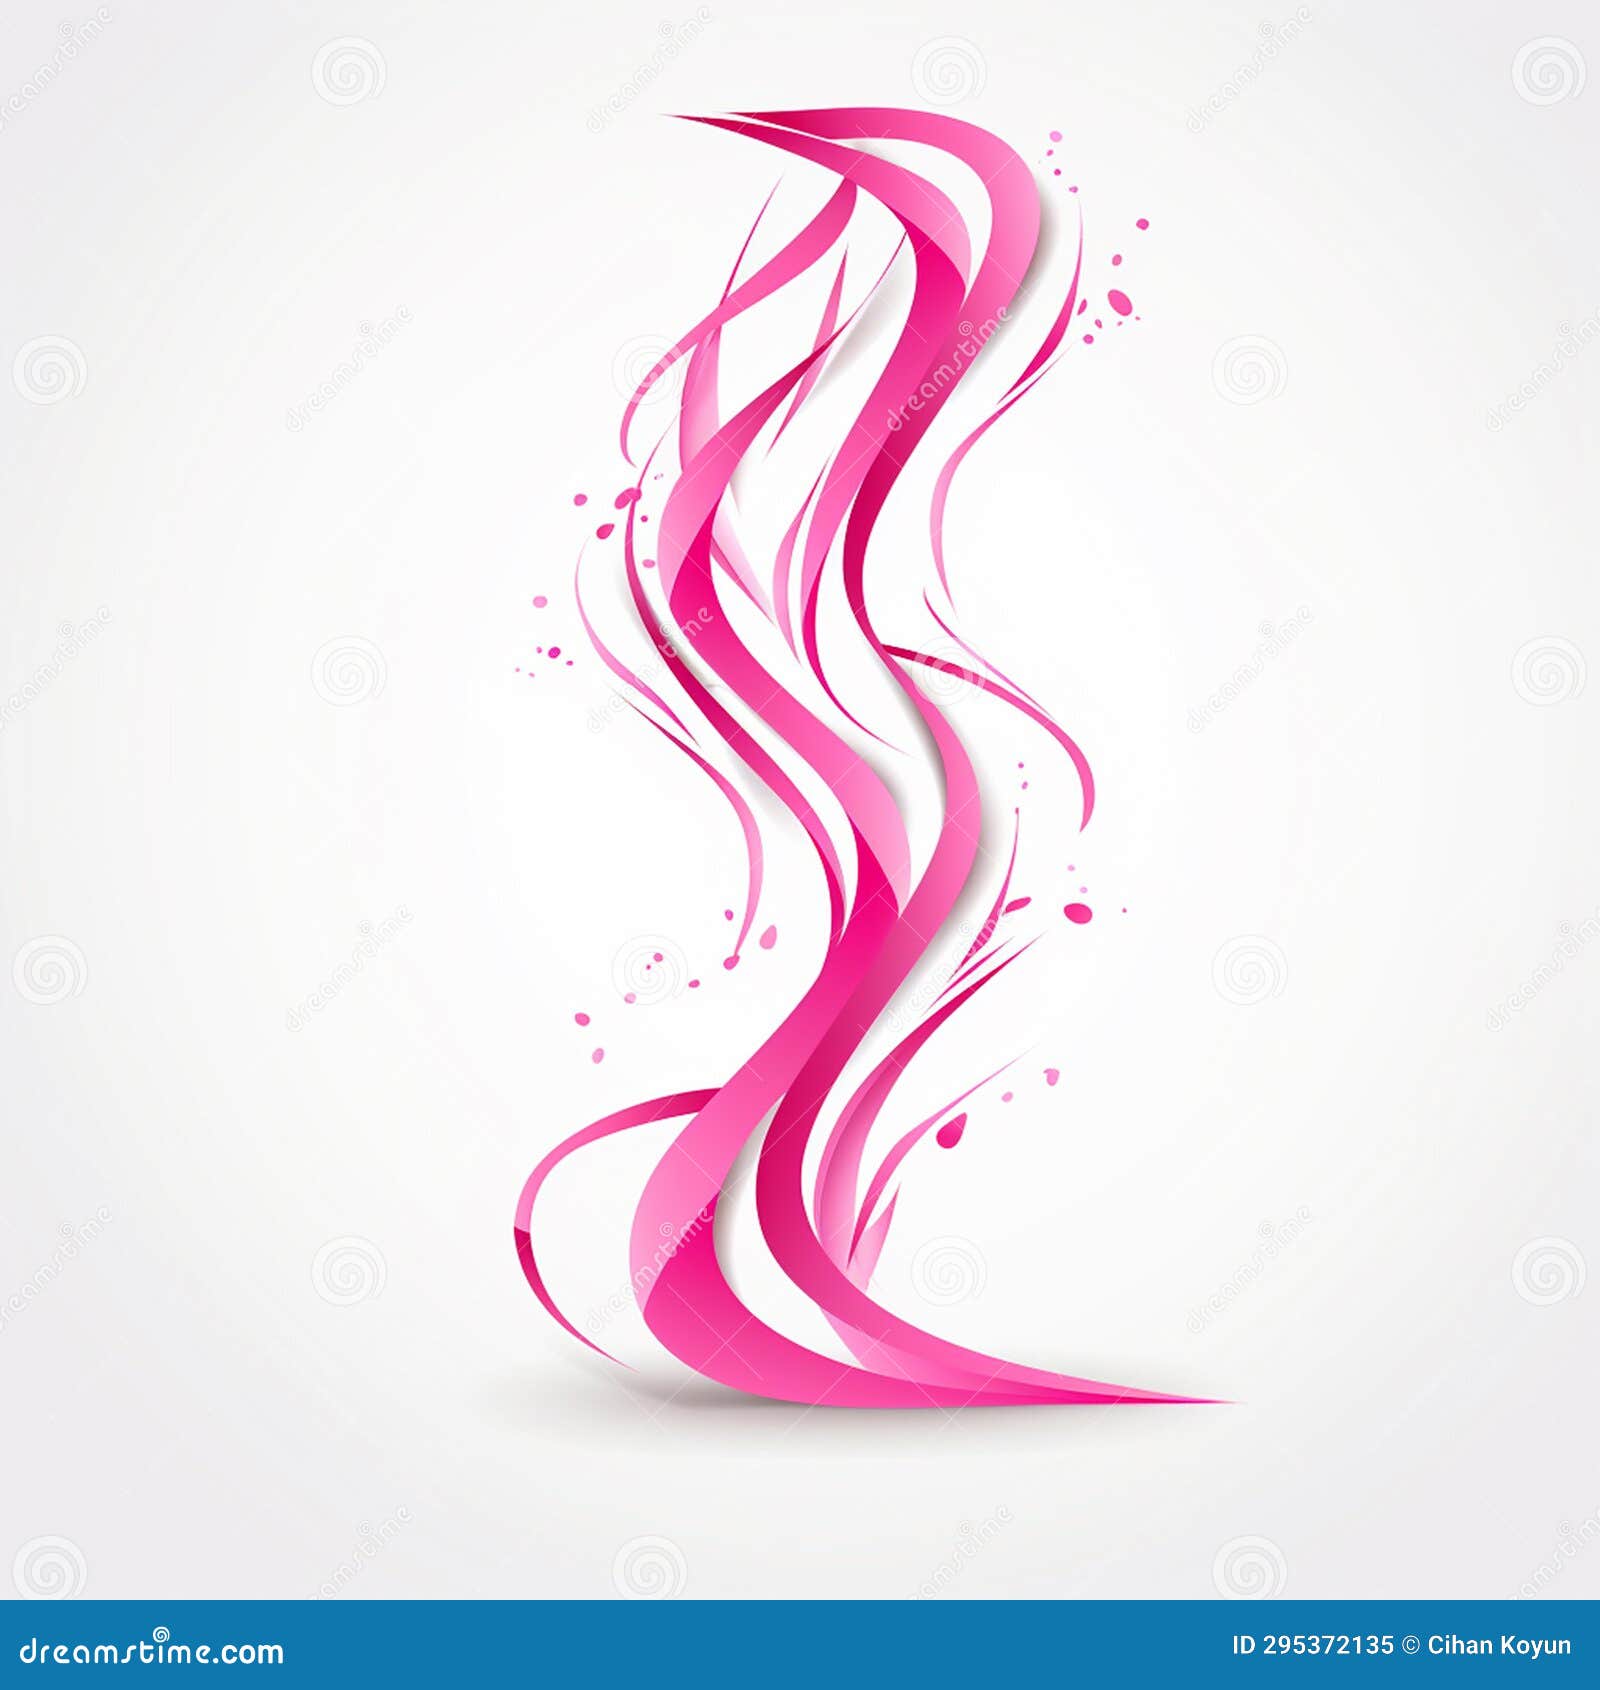 pink ribbon on white background high resolution and royaltyfree